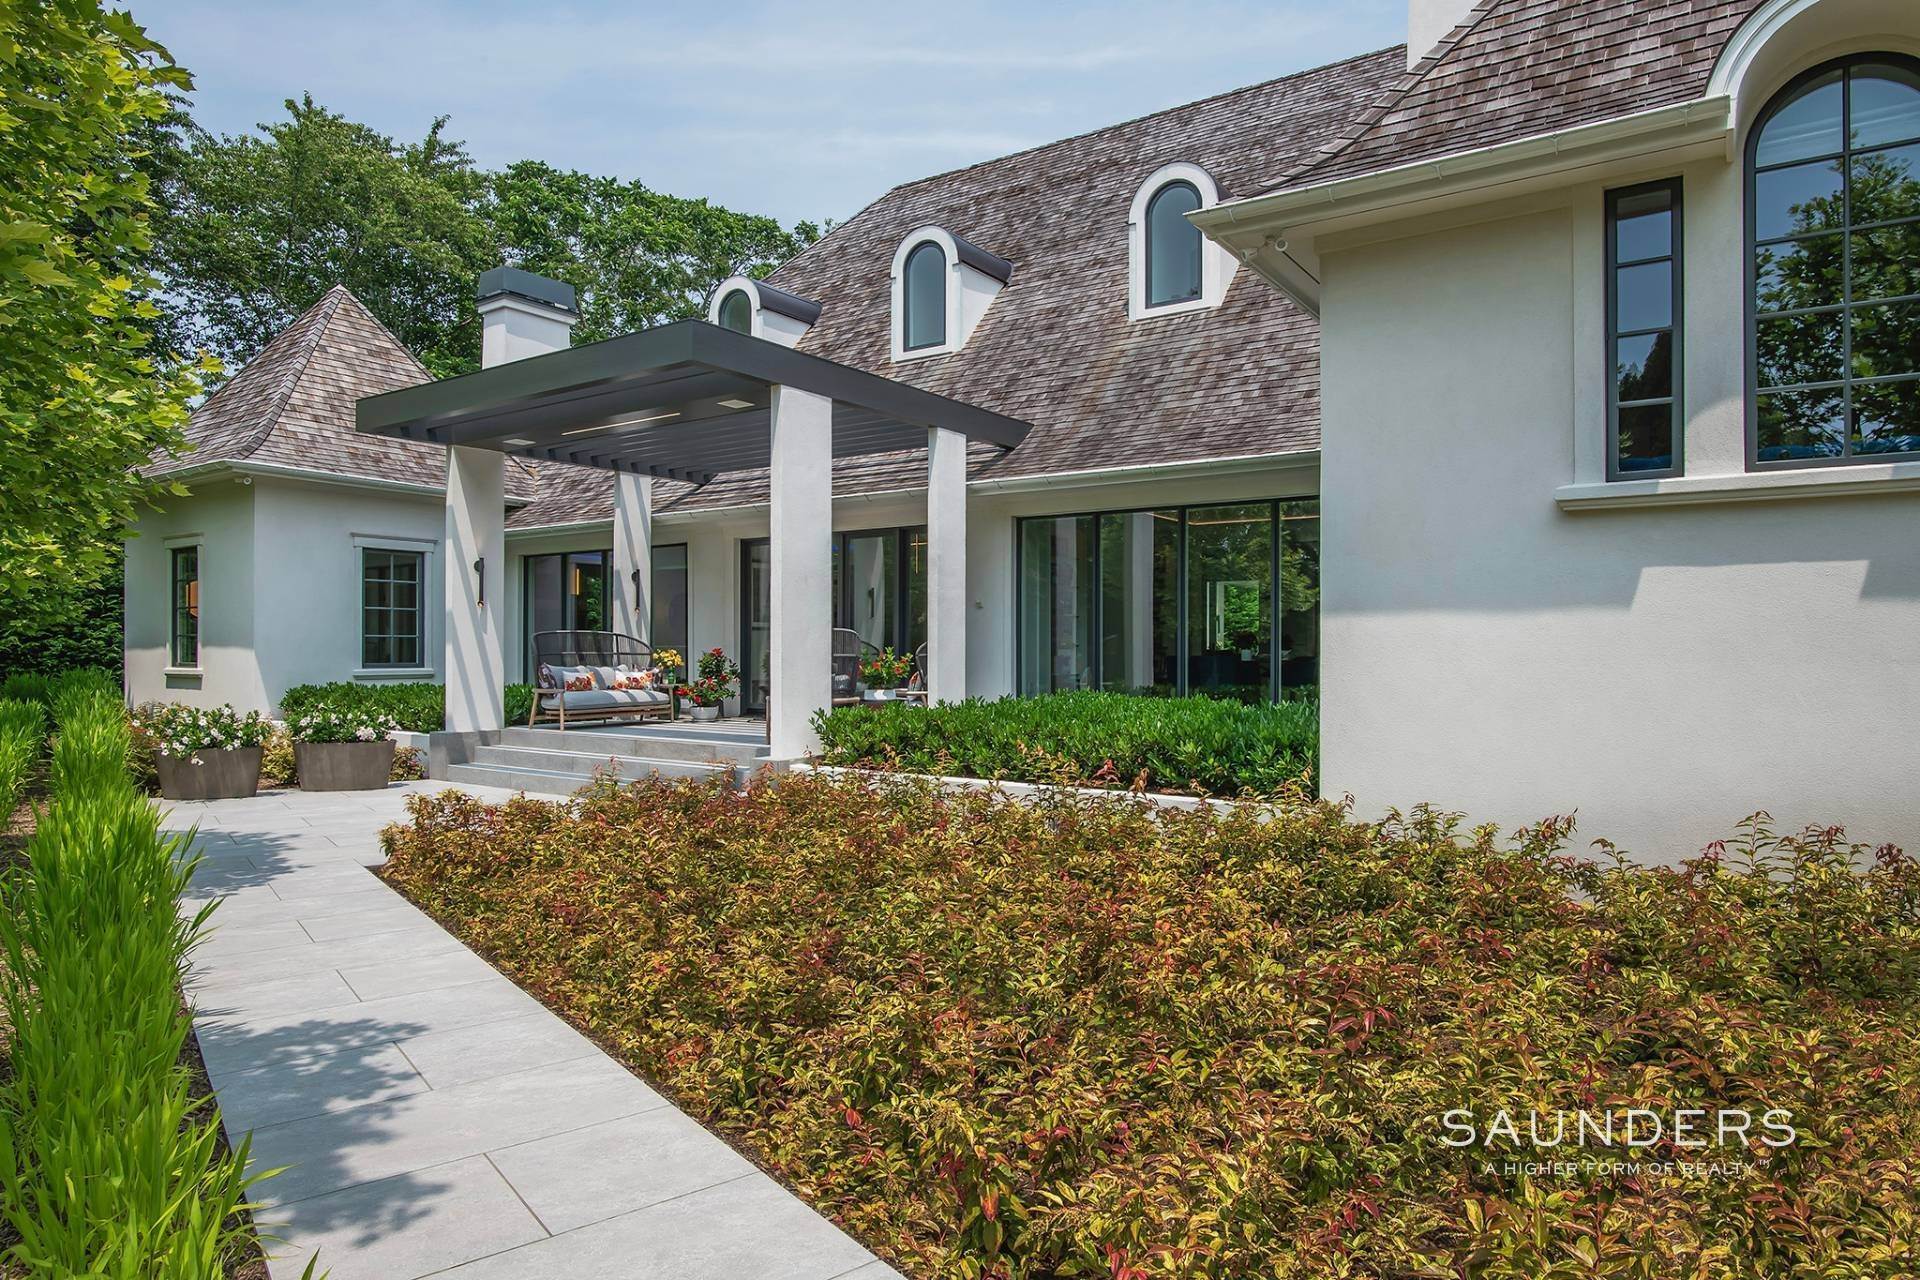 44. Single Family Homes for Sale at The Estate At 67 Hither Lane - Move-In Ready East Hampton Village, East Hampton, NY 11937